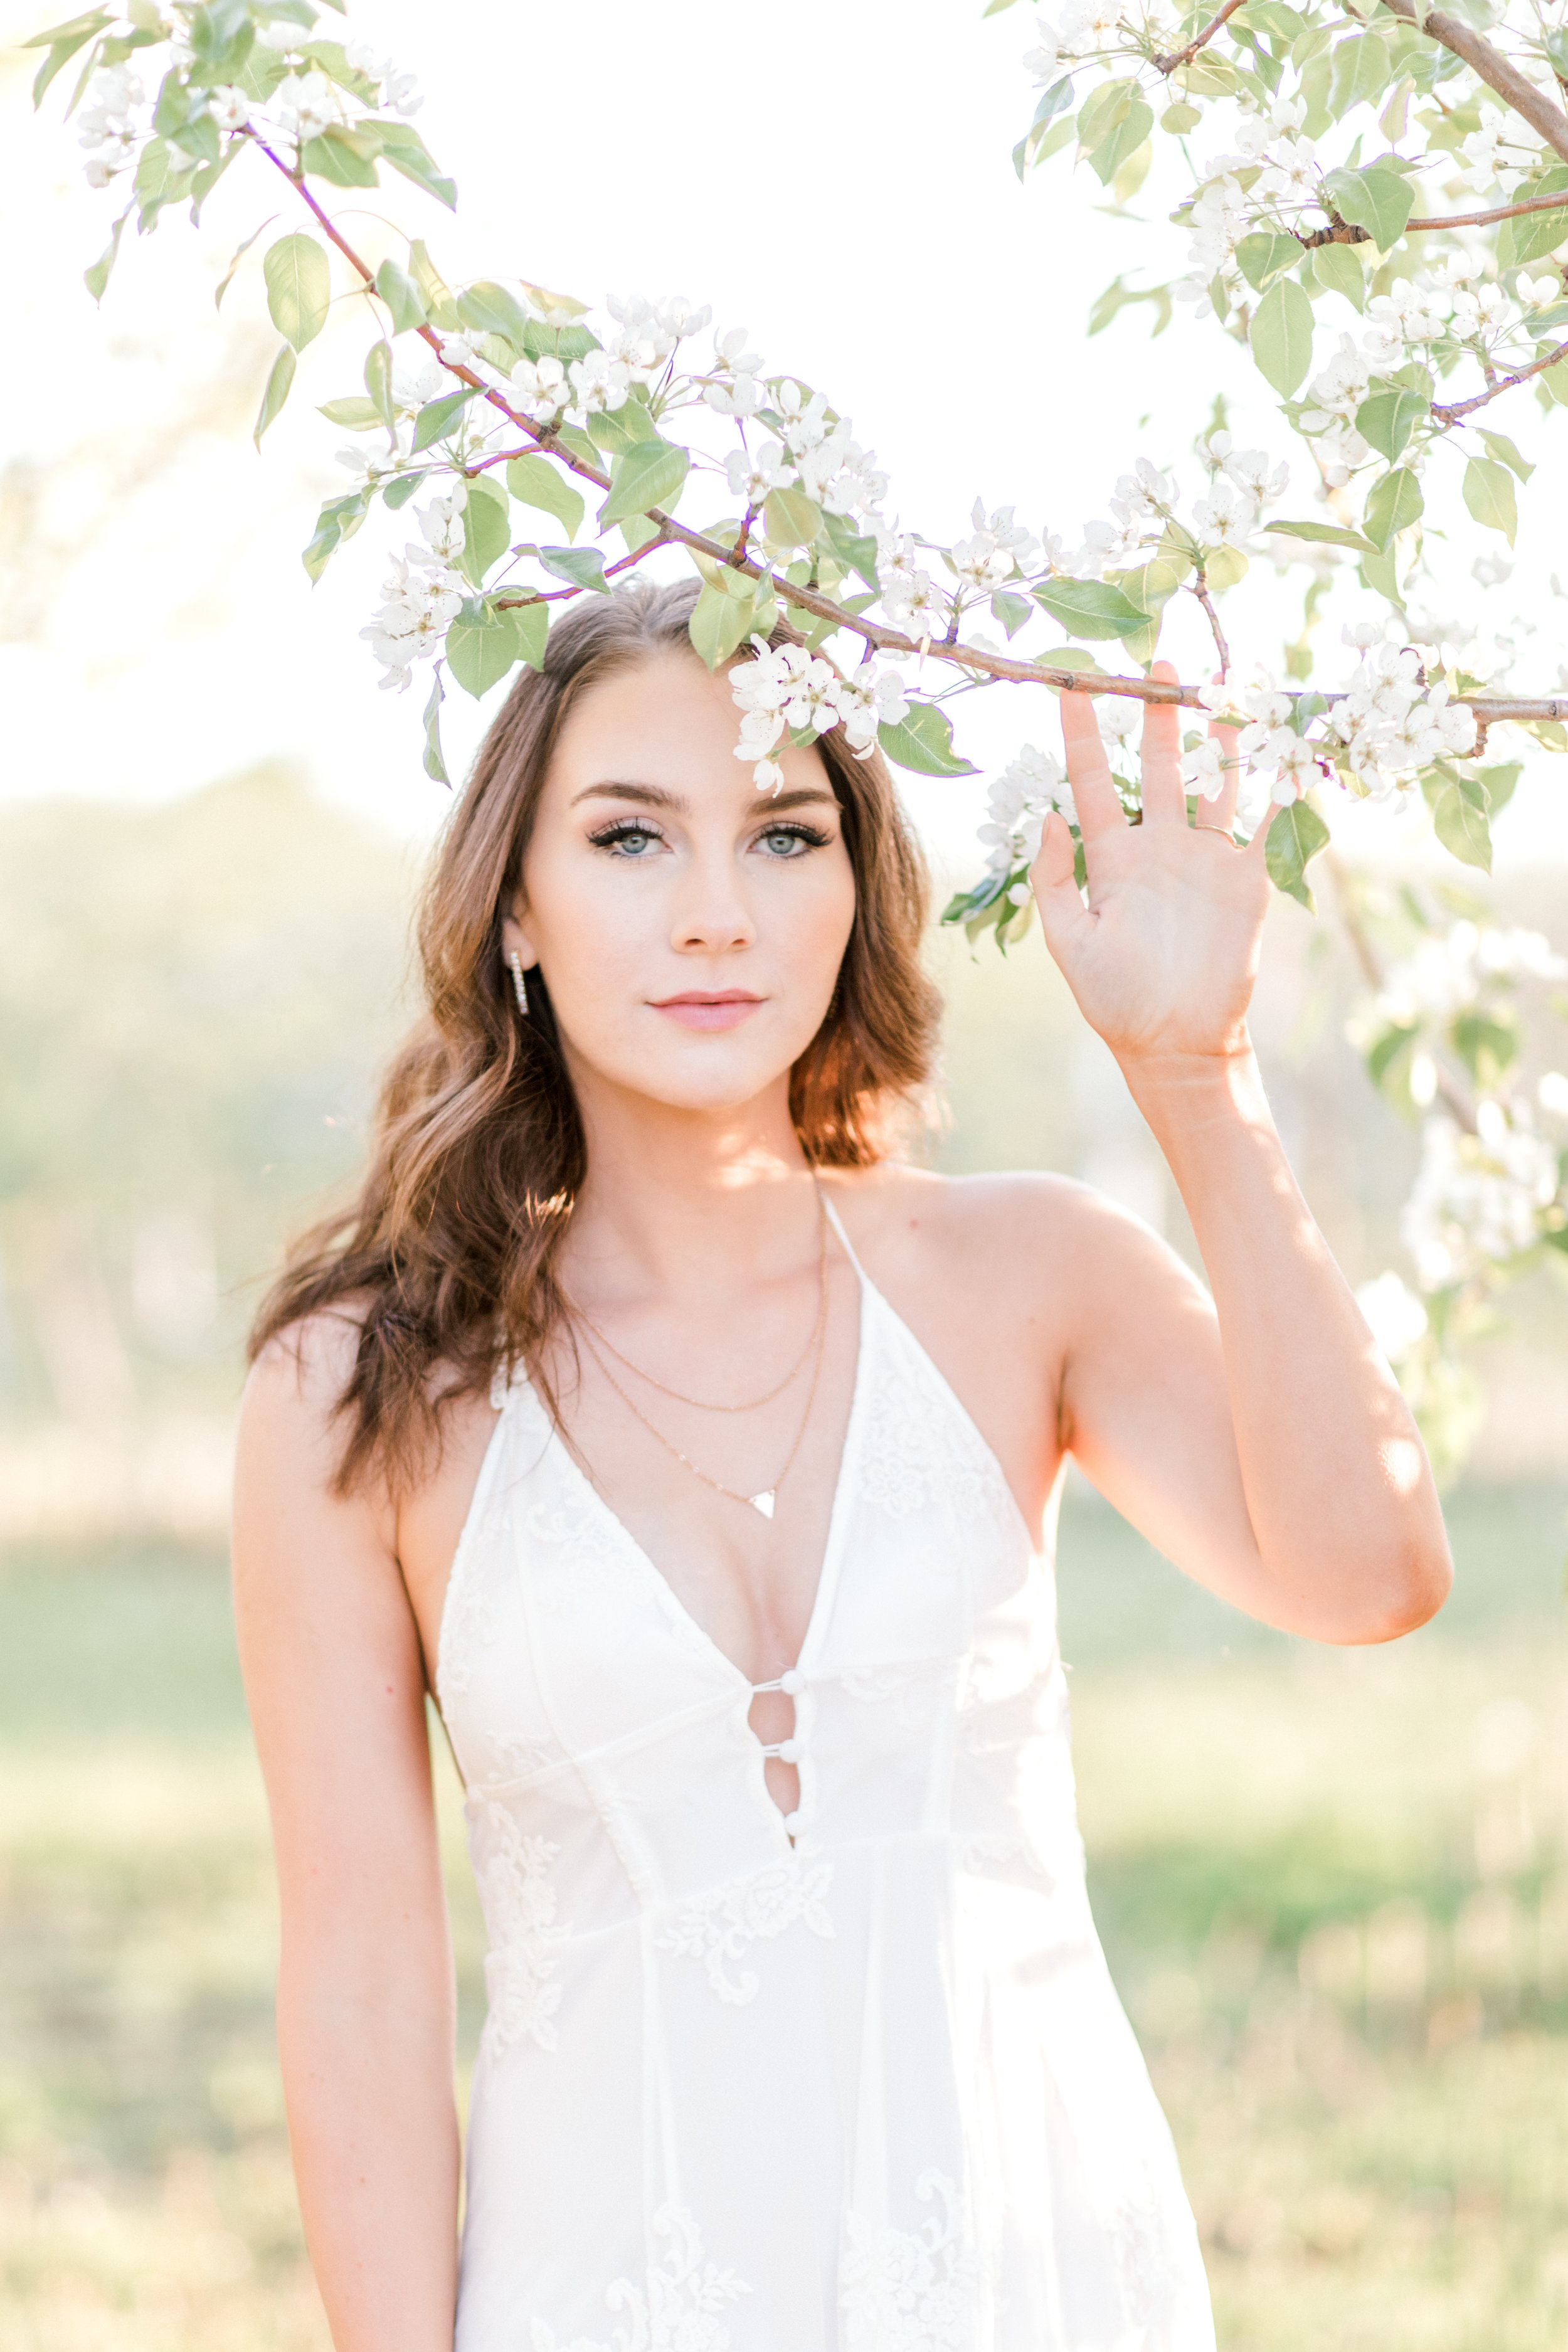 Bridal portrait ideas for bohemian bride. Apple orchard engagement photos of bride to be during sunrise engagement session.